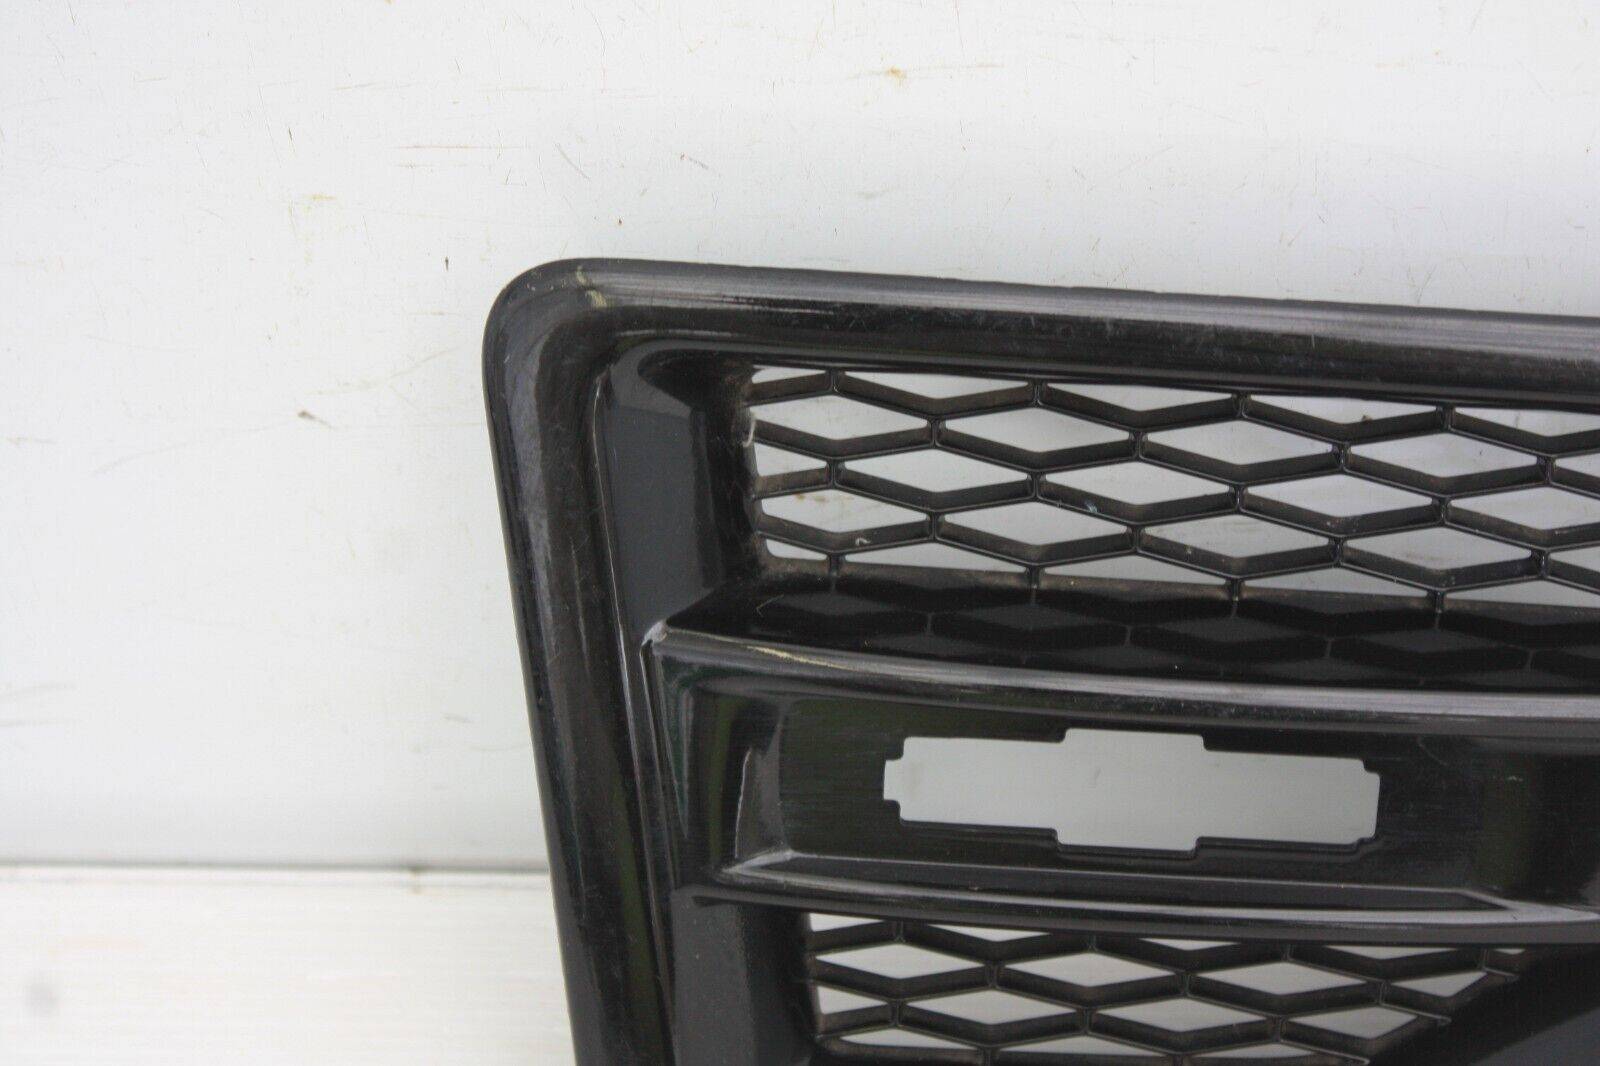 Land-Rover-Freelander-Front-Right-Side-Wing-Grill-2007-to-2015-6H52-014K80-BB-176267107753-2